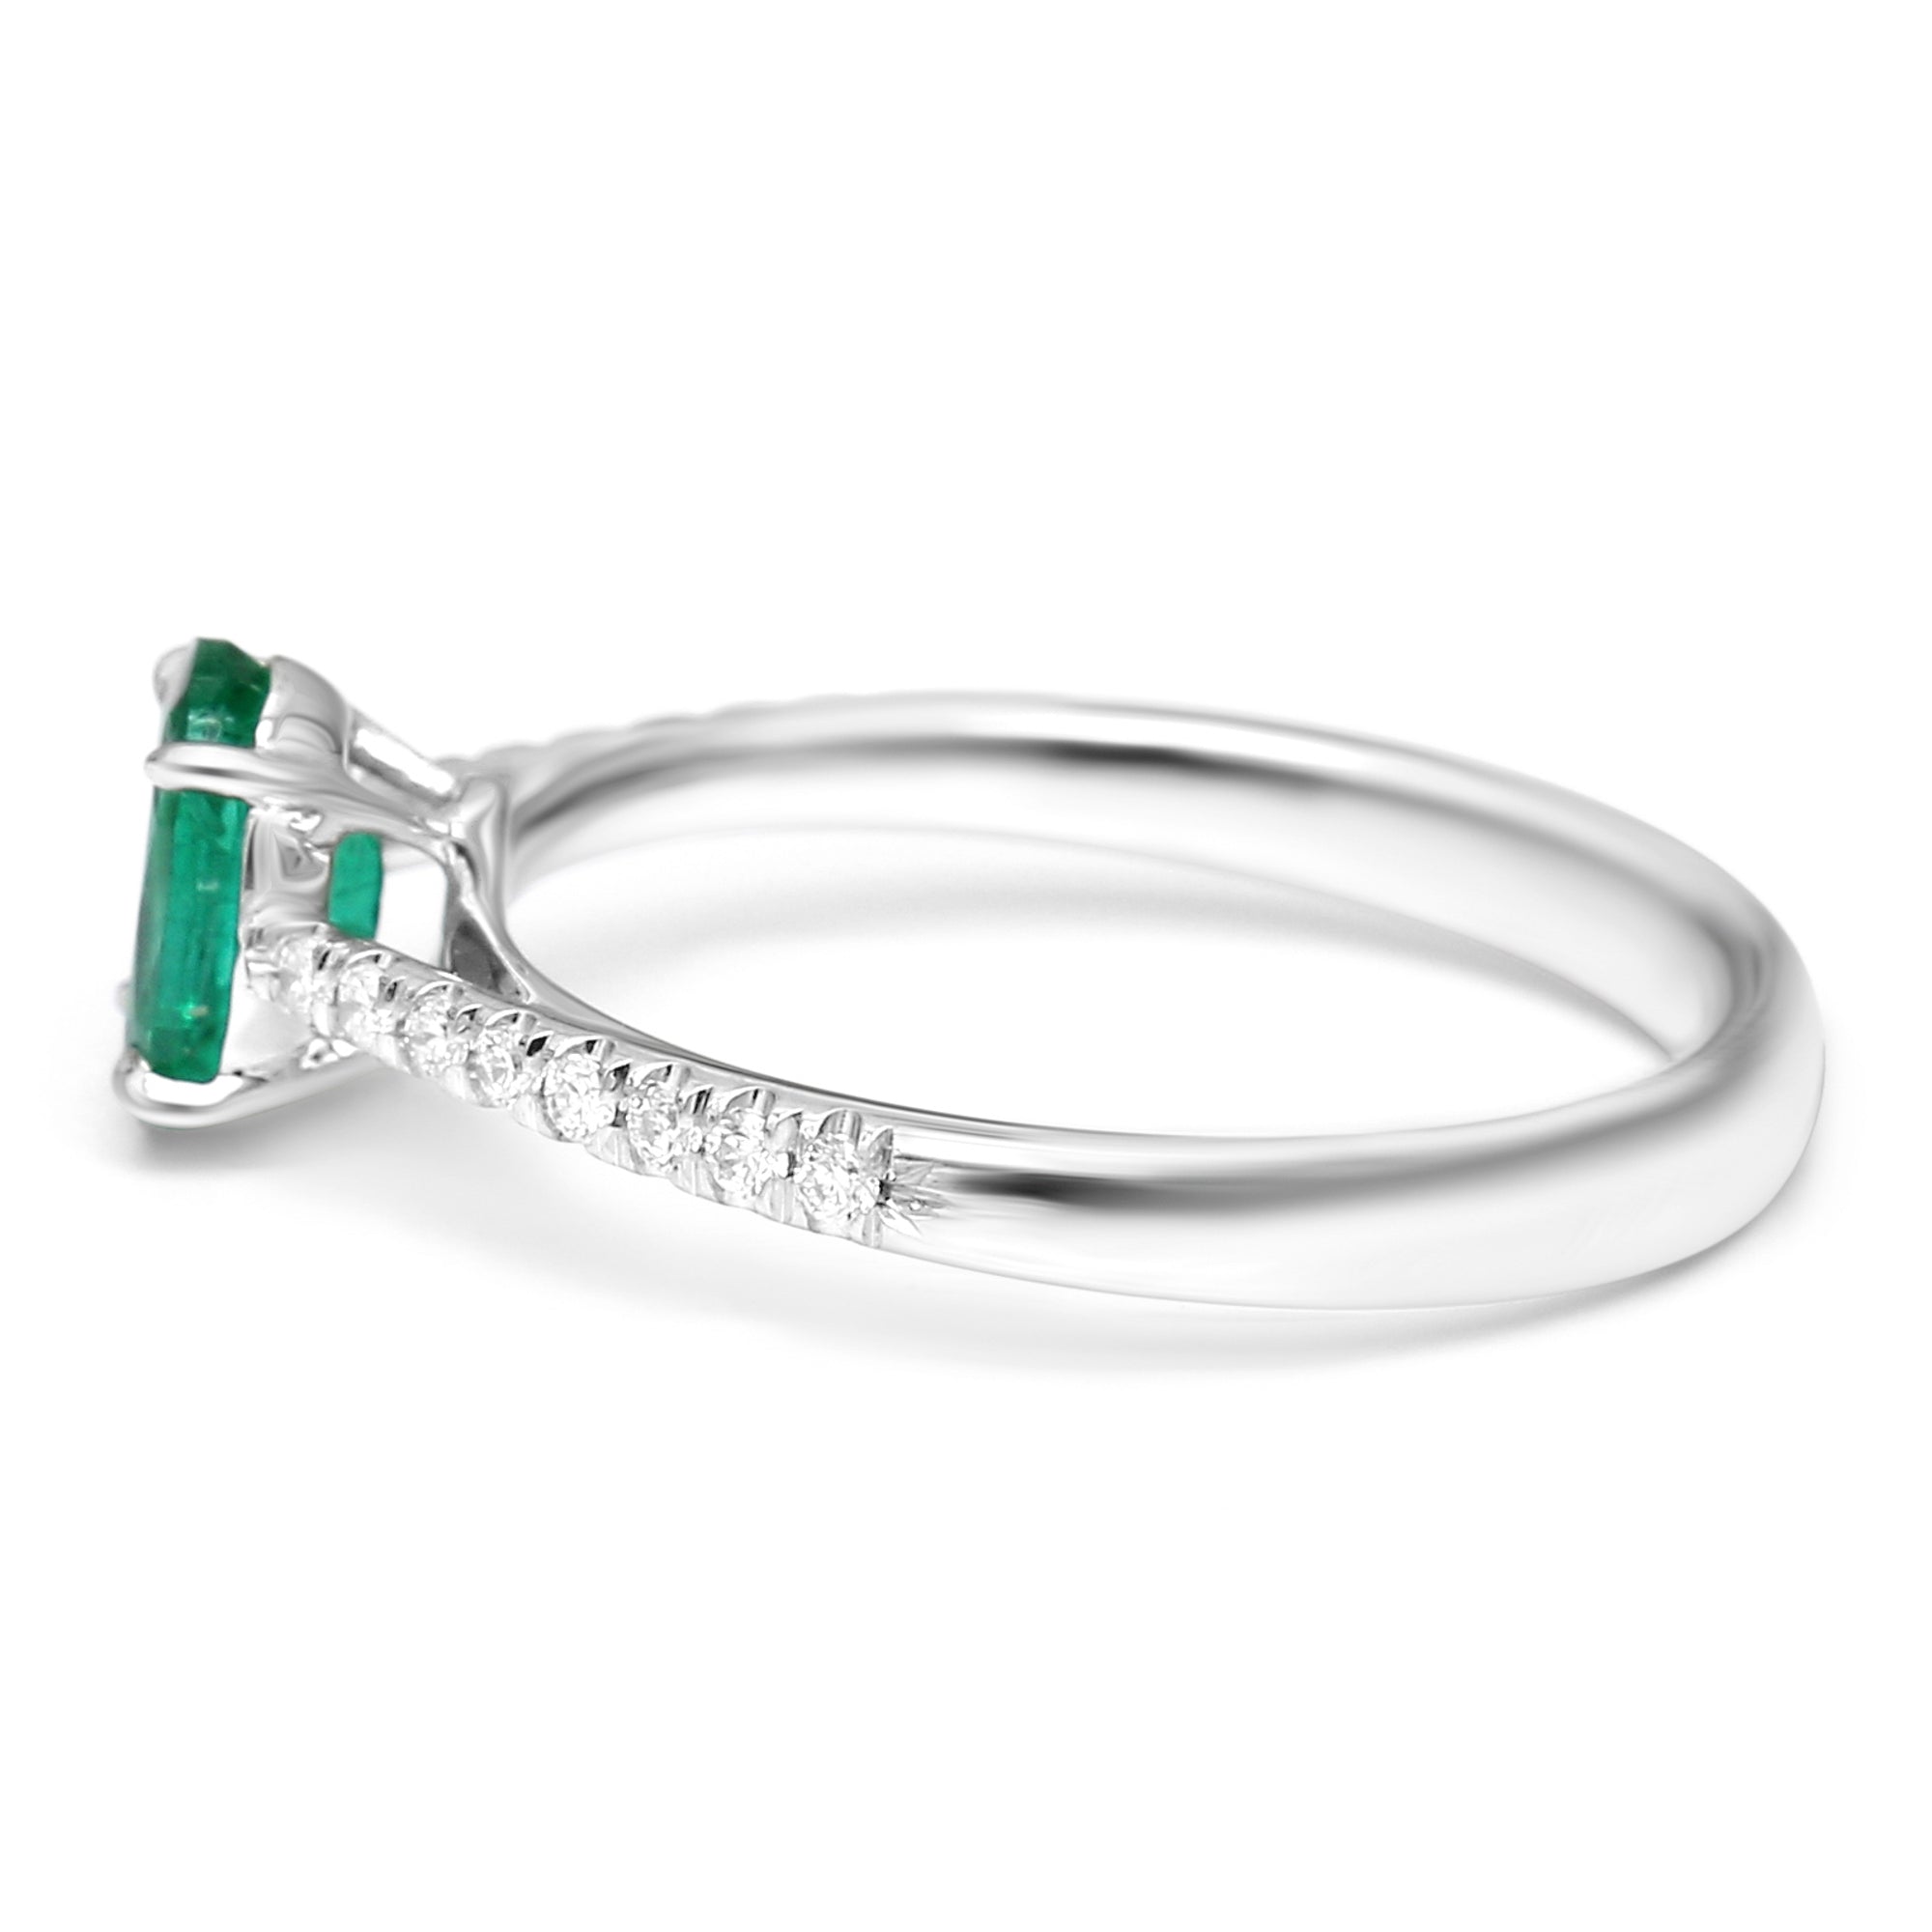 Emerald Oval Ring with Diamonds - White Gold